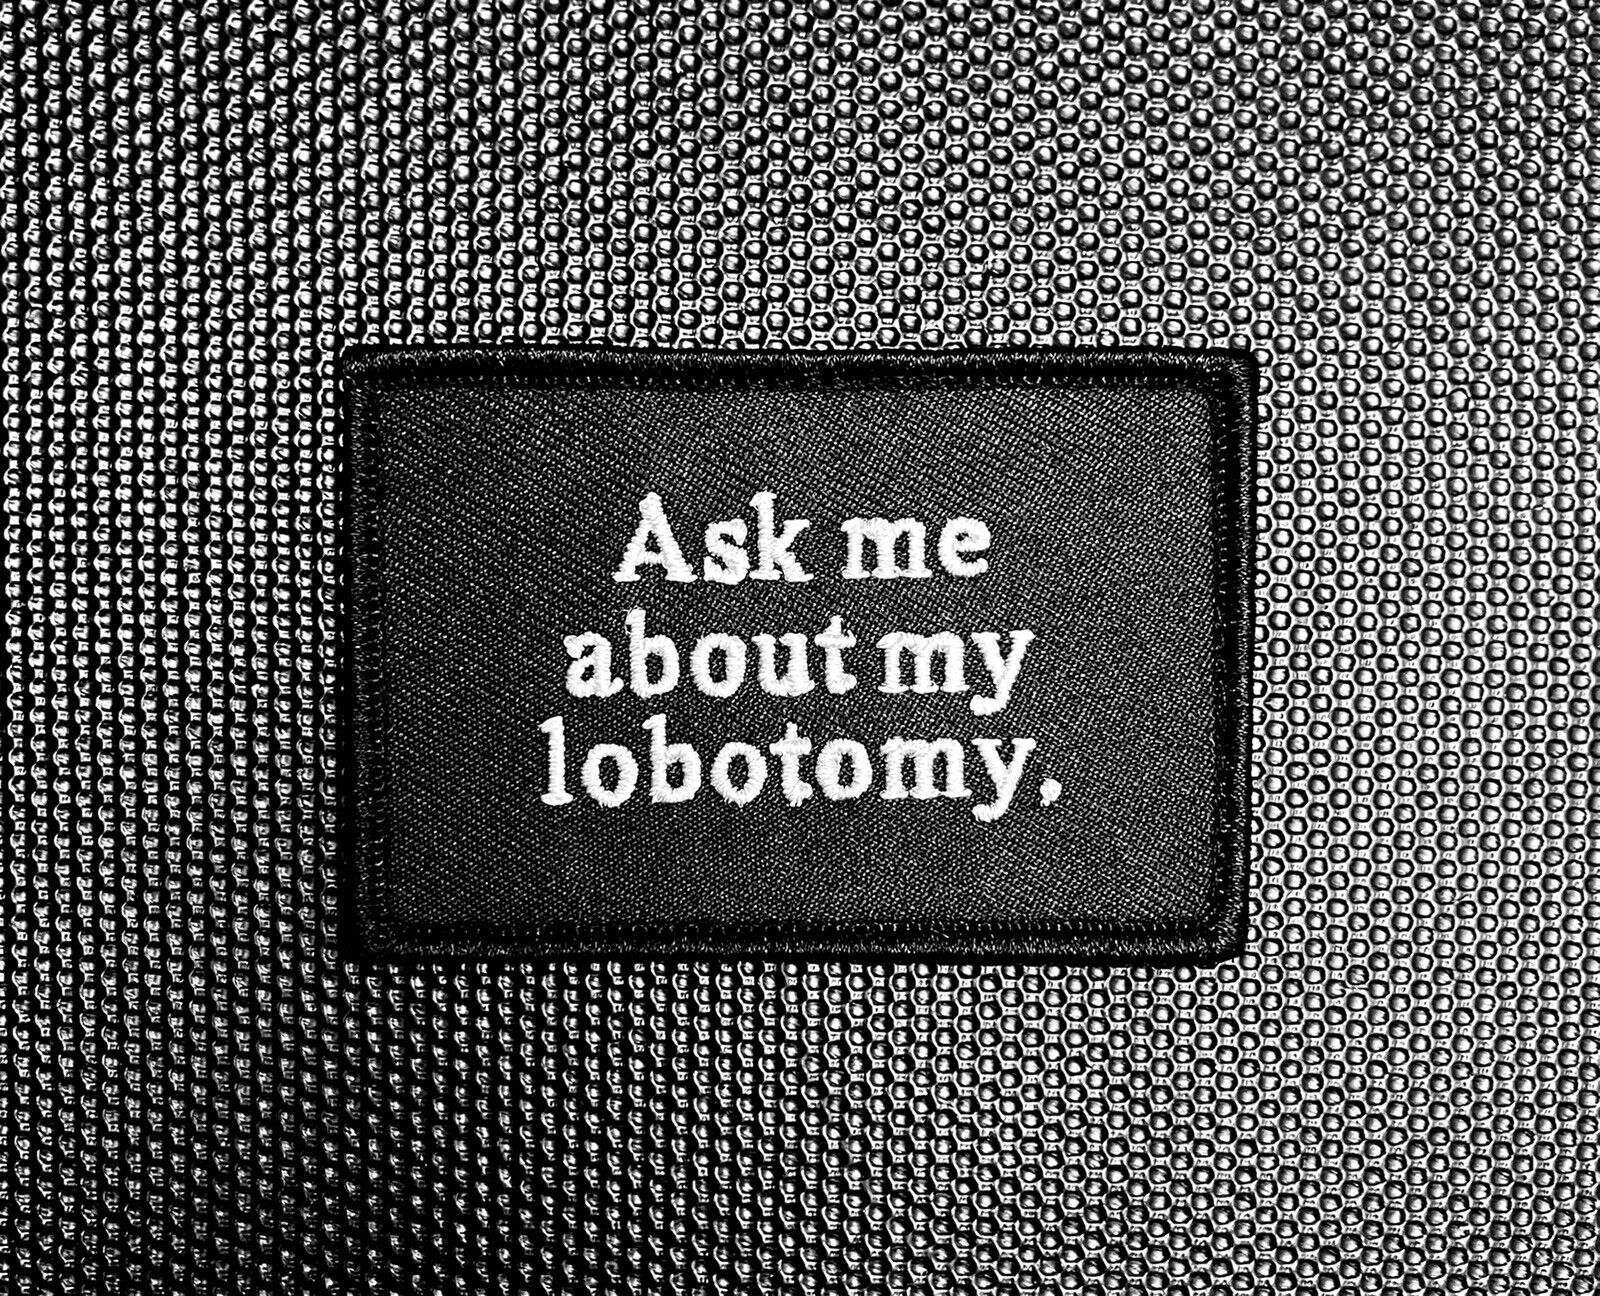 ASK ME ABOUT MY LOBOTOMY Embroidered Morale Patch Brain Dead BOHICA DILLIGAF